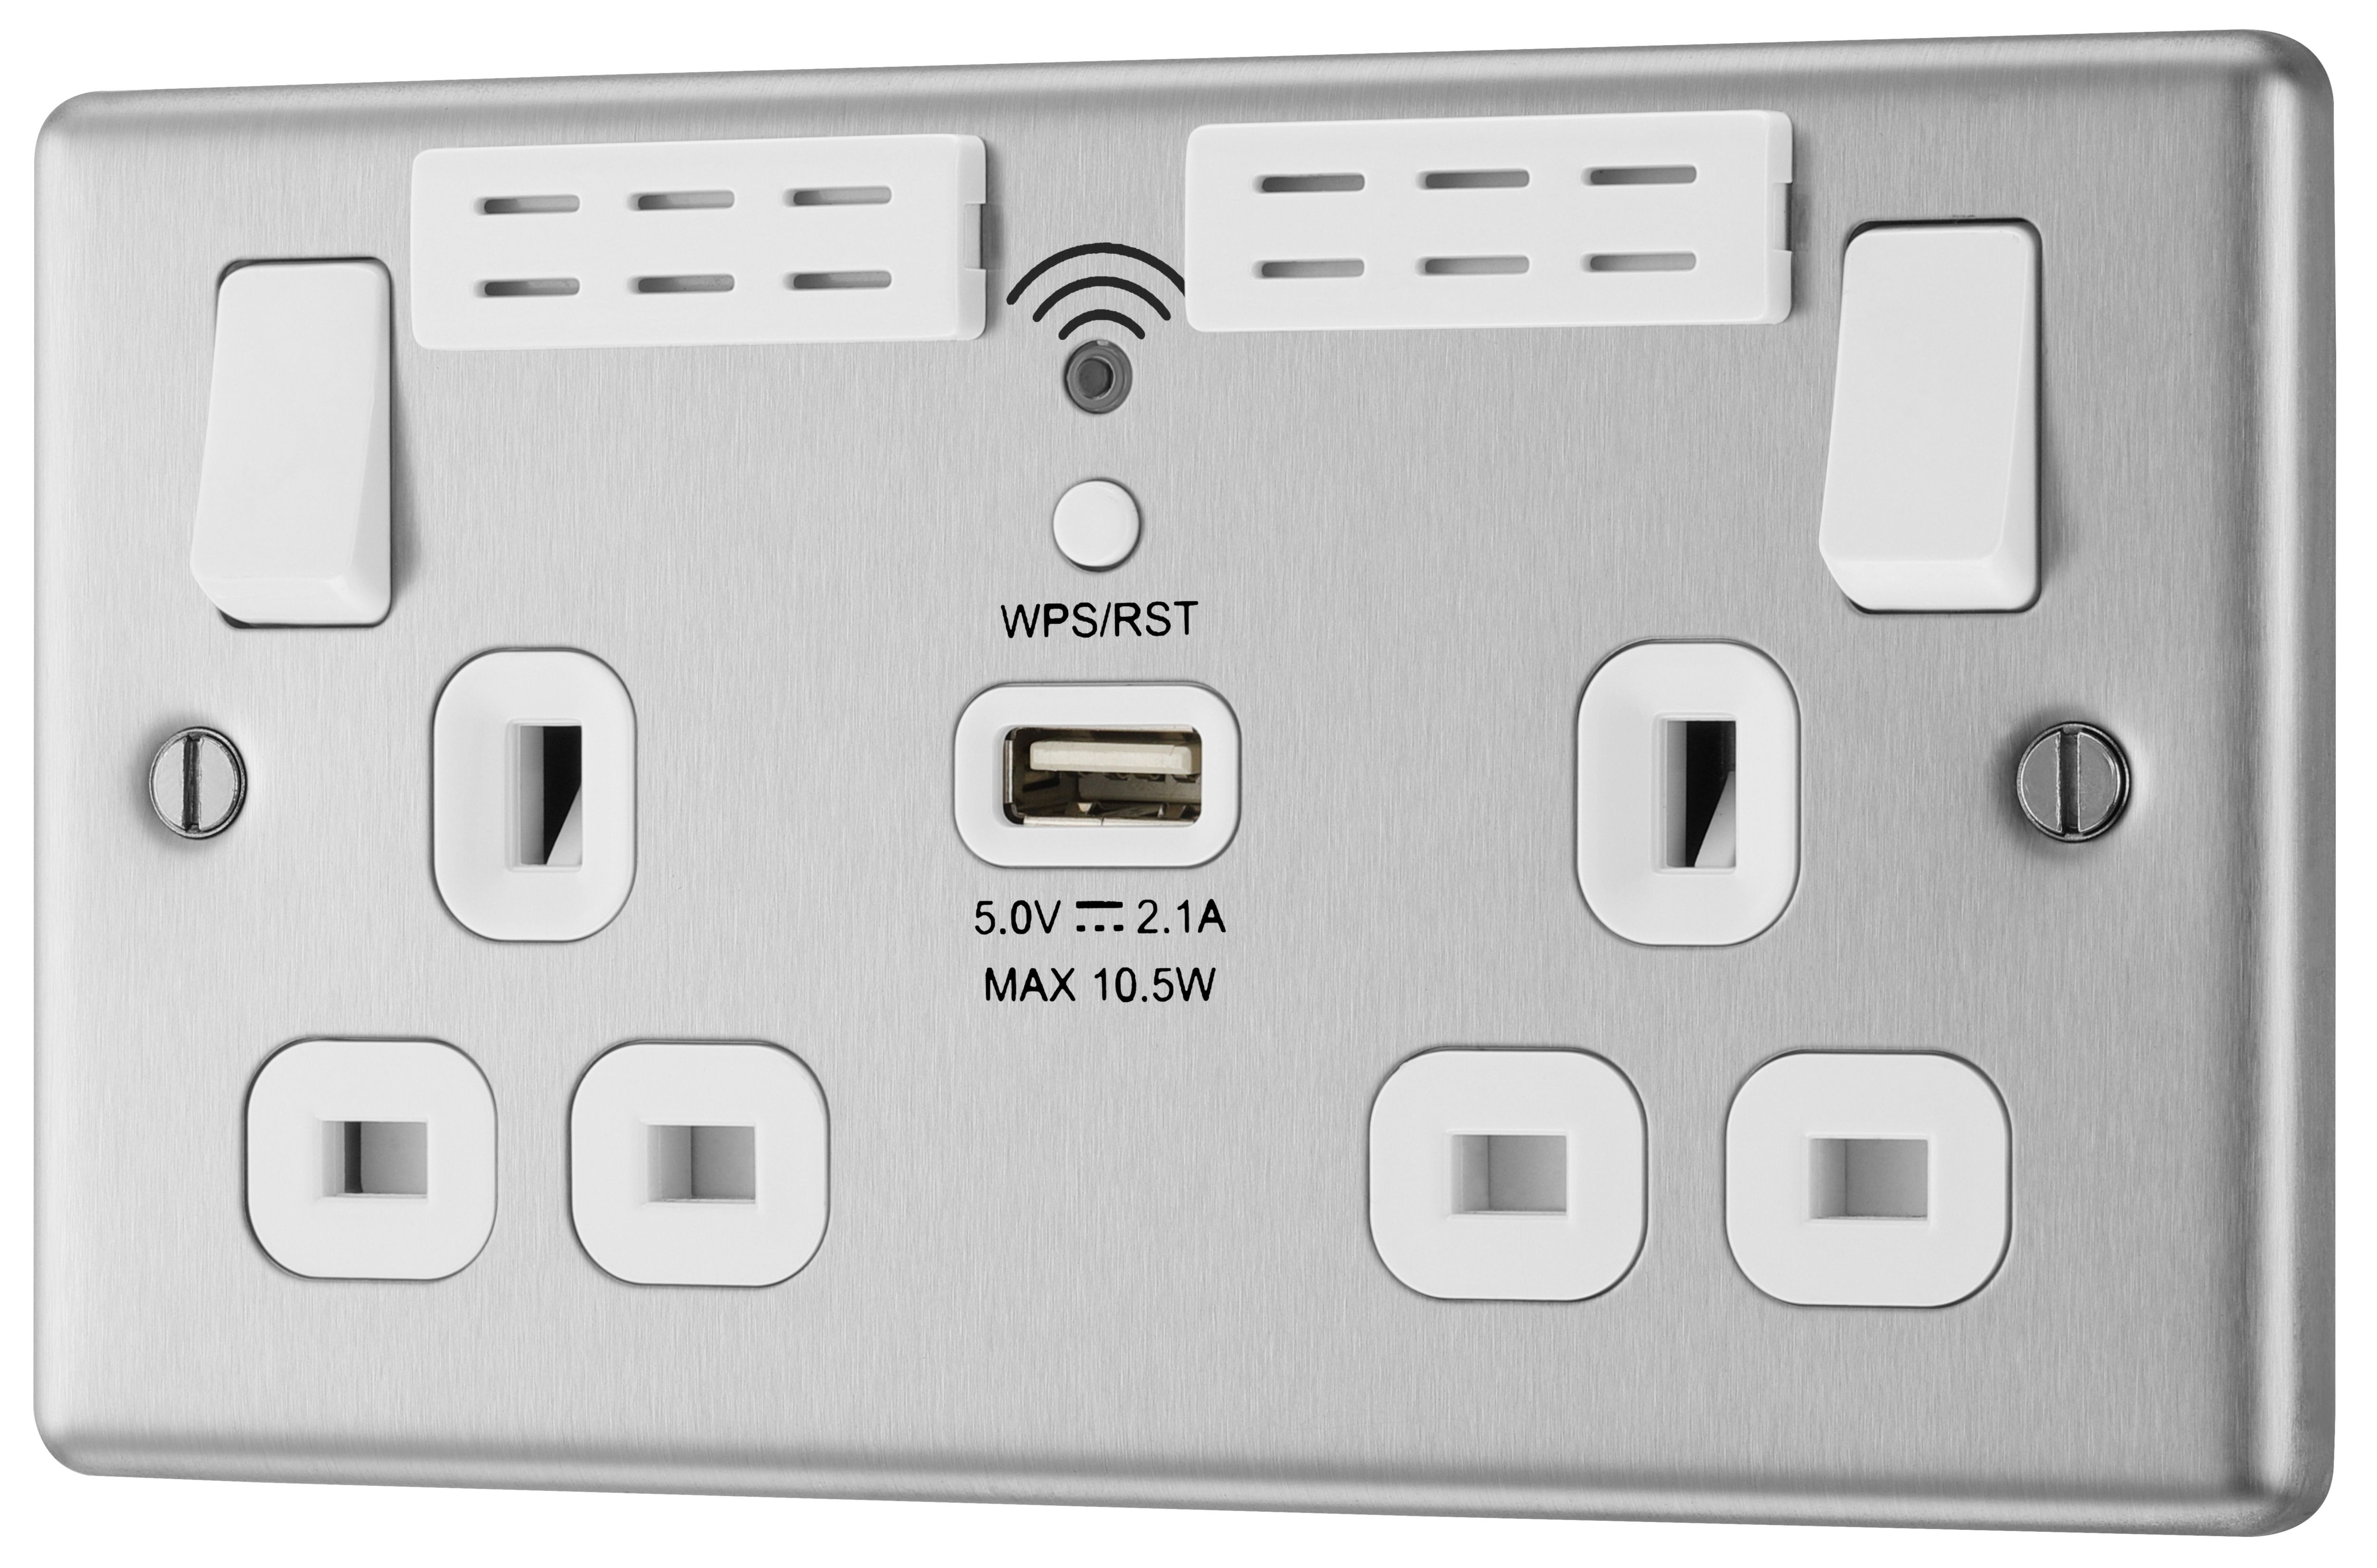 GoodHome Brushed Steel 13A Switched Double WiFi extender socket with USB